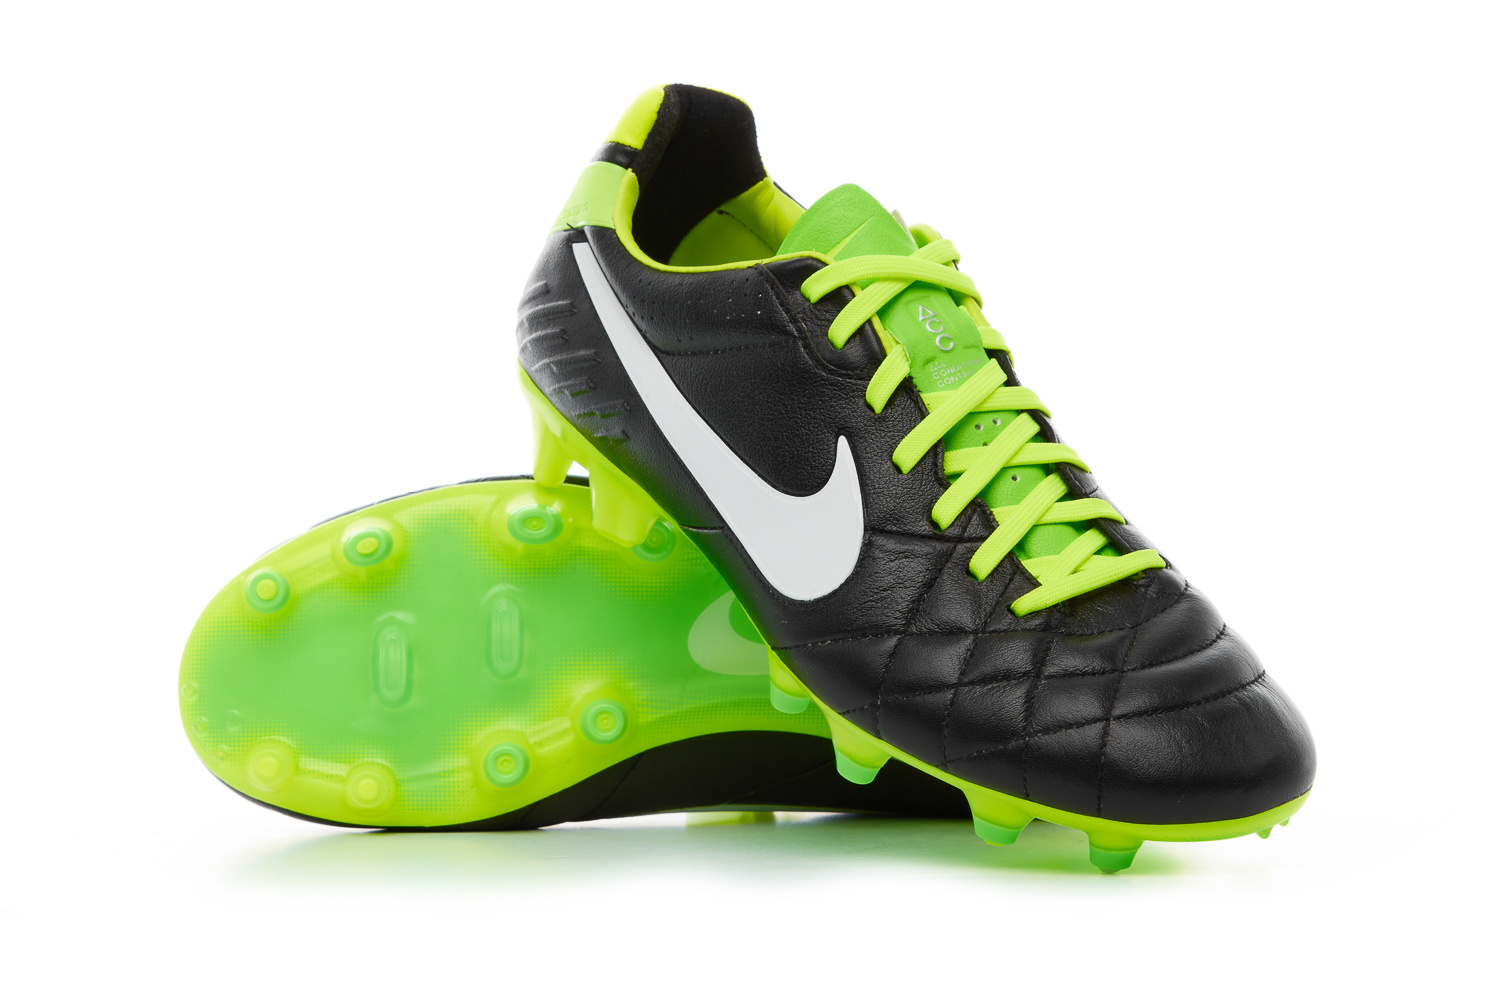 2013 Nike Tiempo Legend IV Football Boots *As